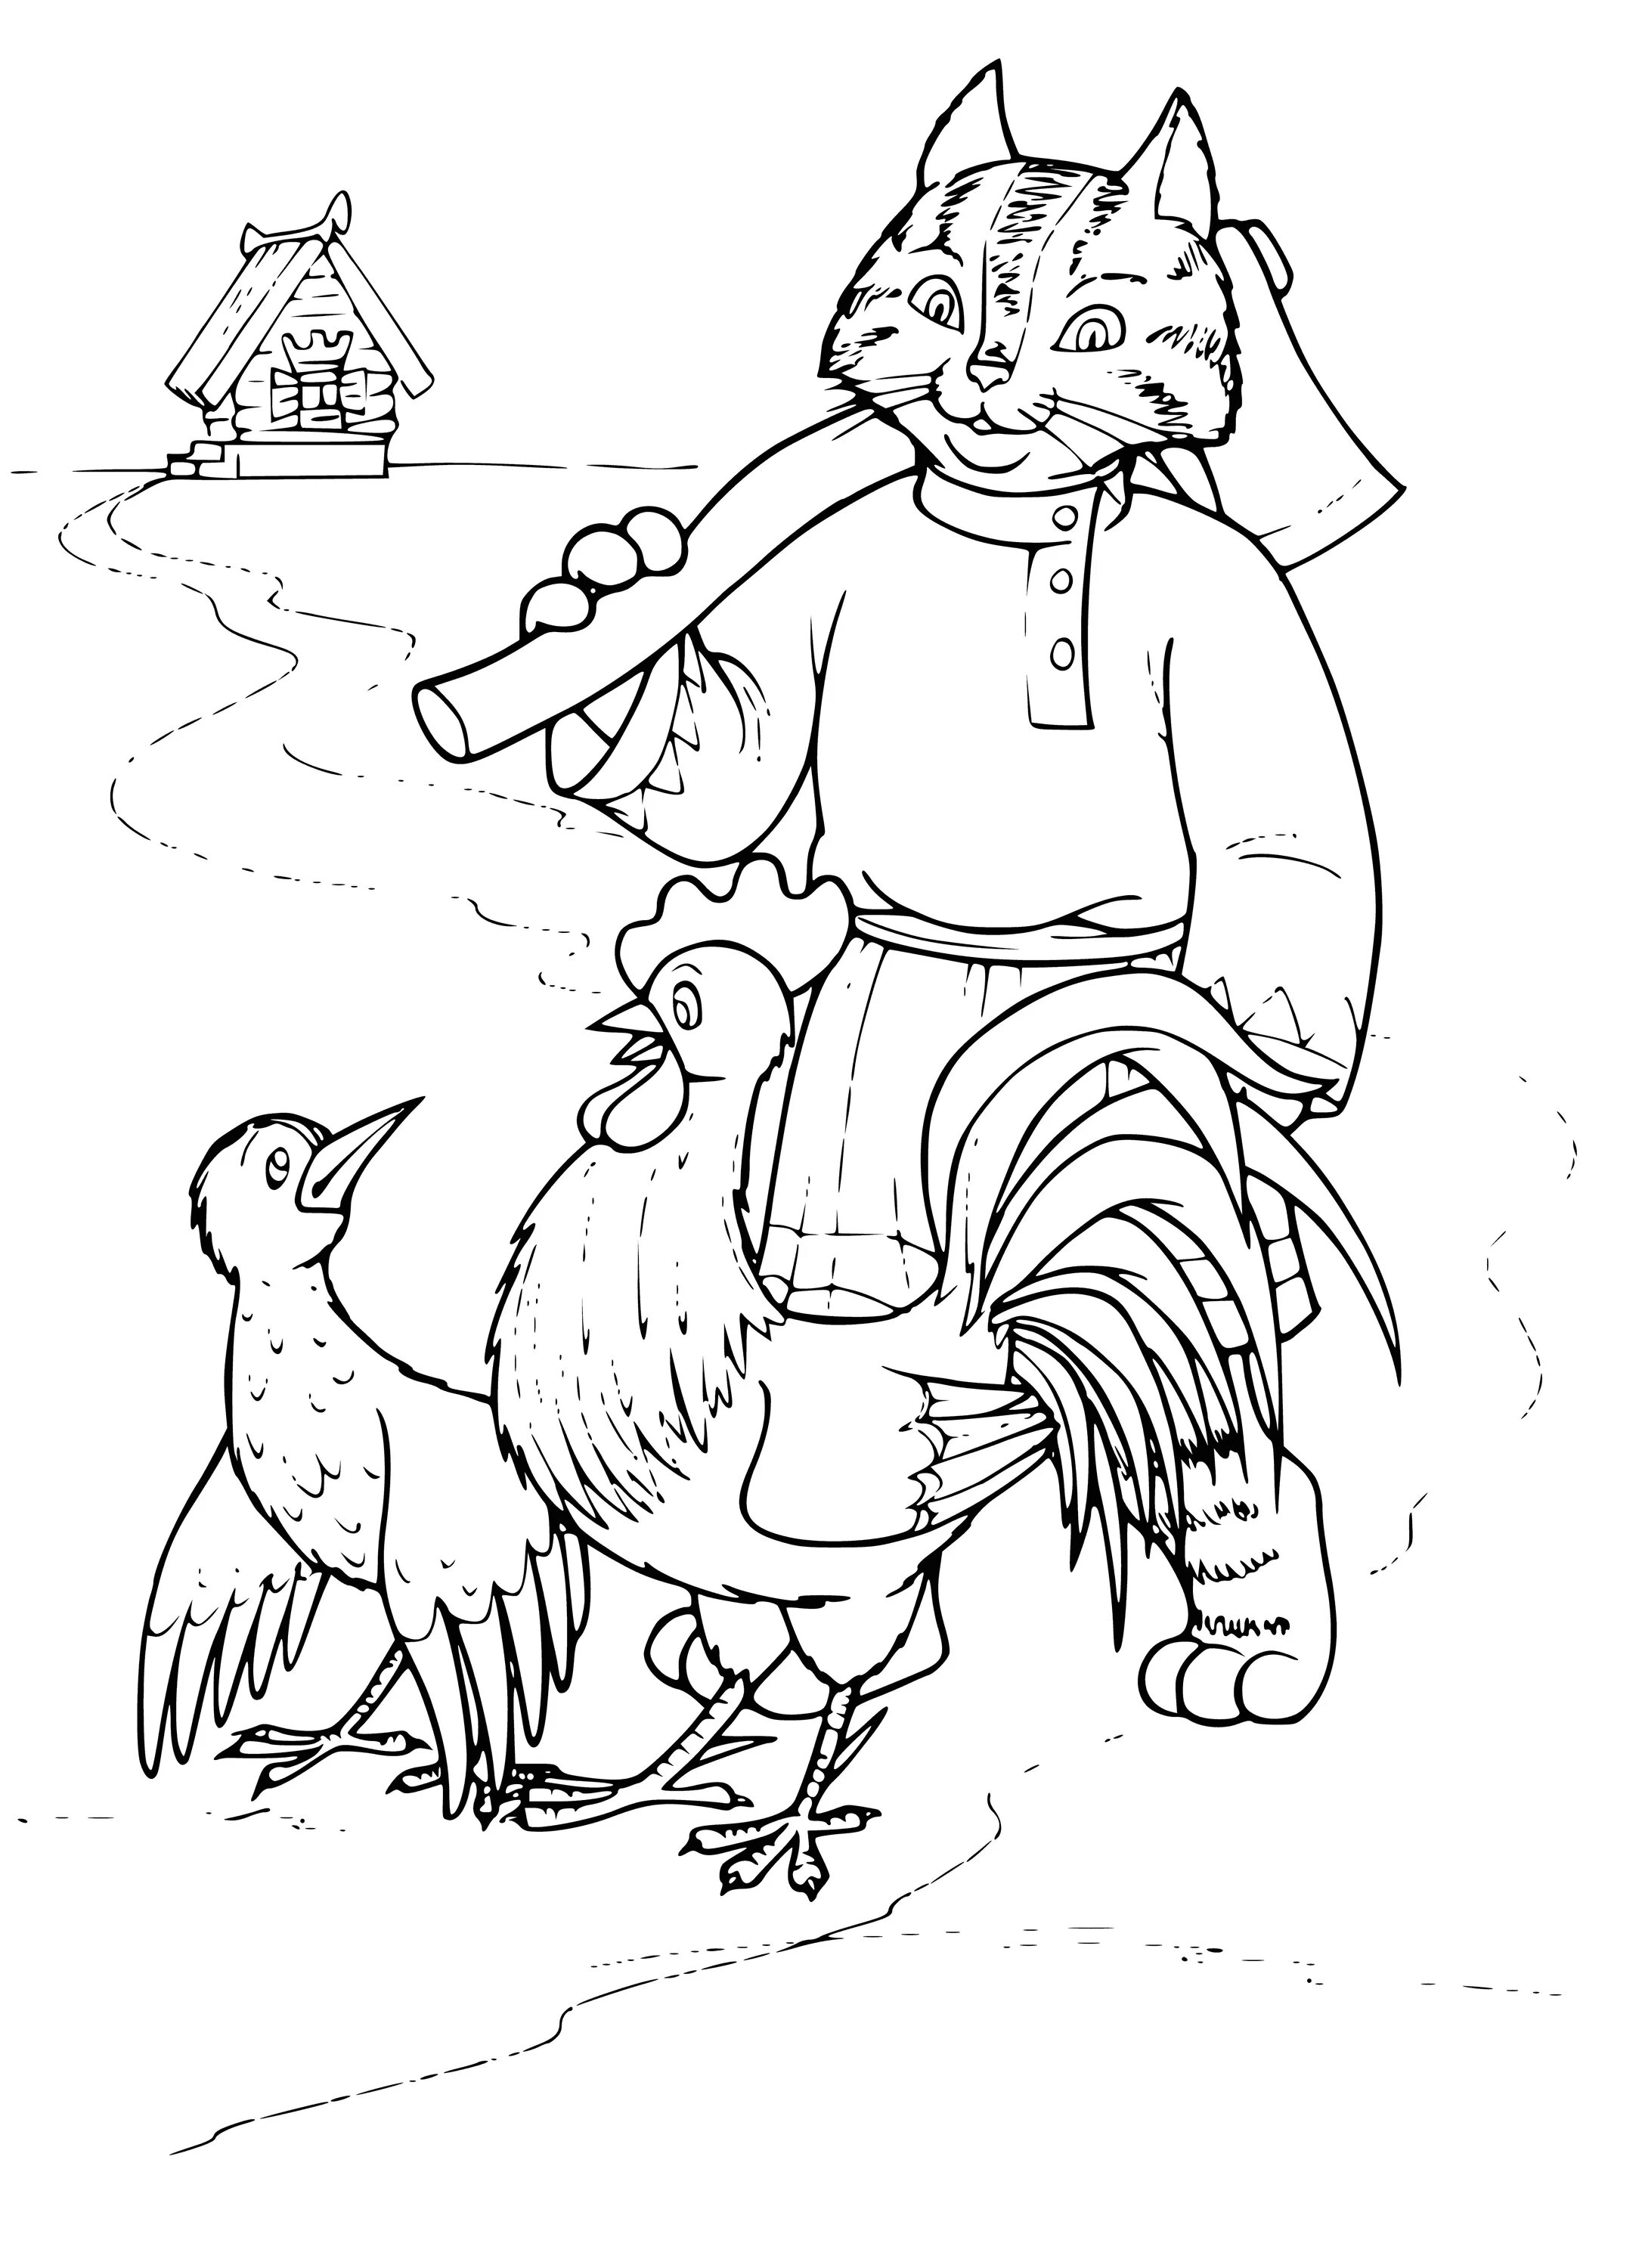 Amusing coloring fox and rooster Russian folk tale